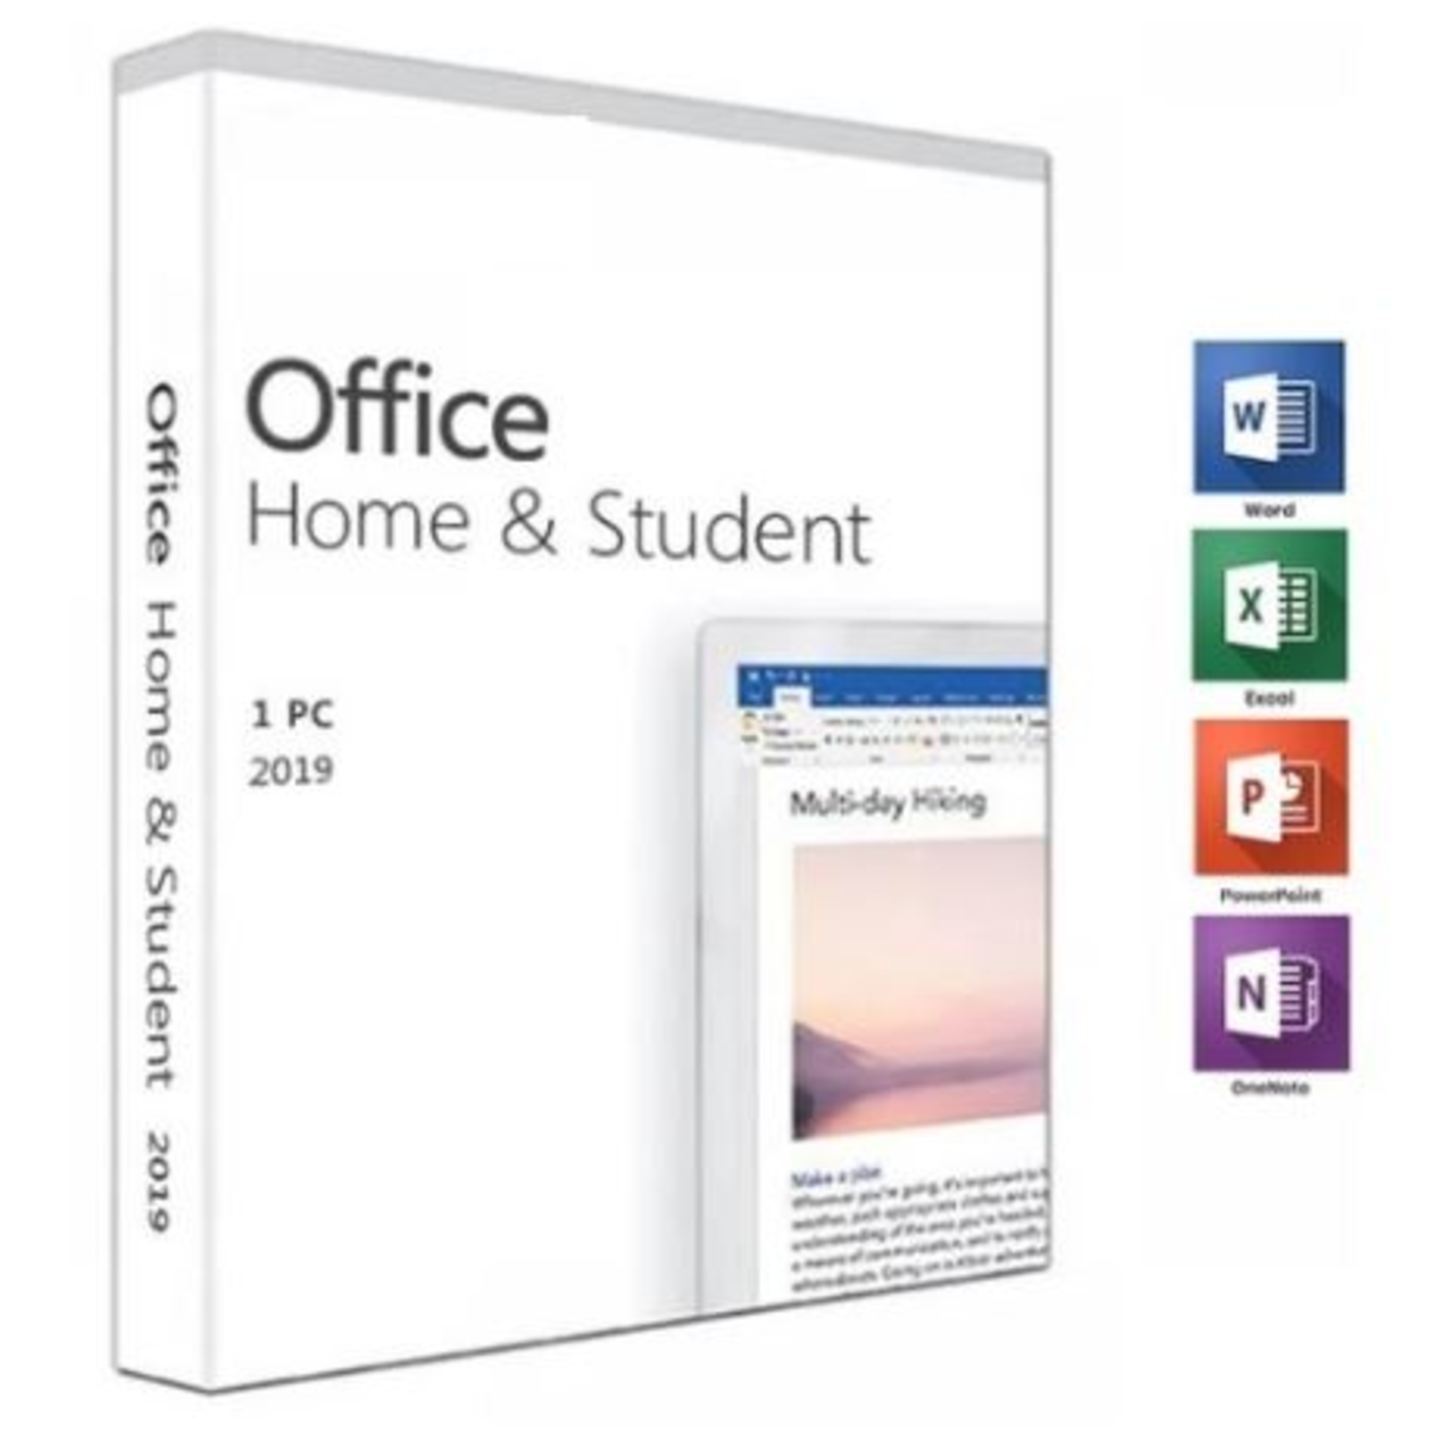 ms office mac home and student 2016